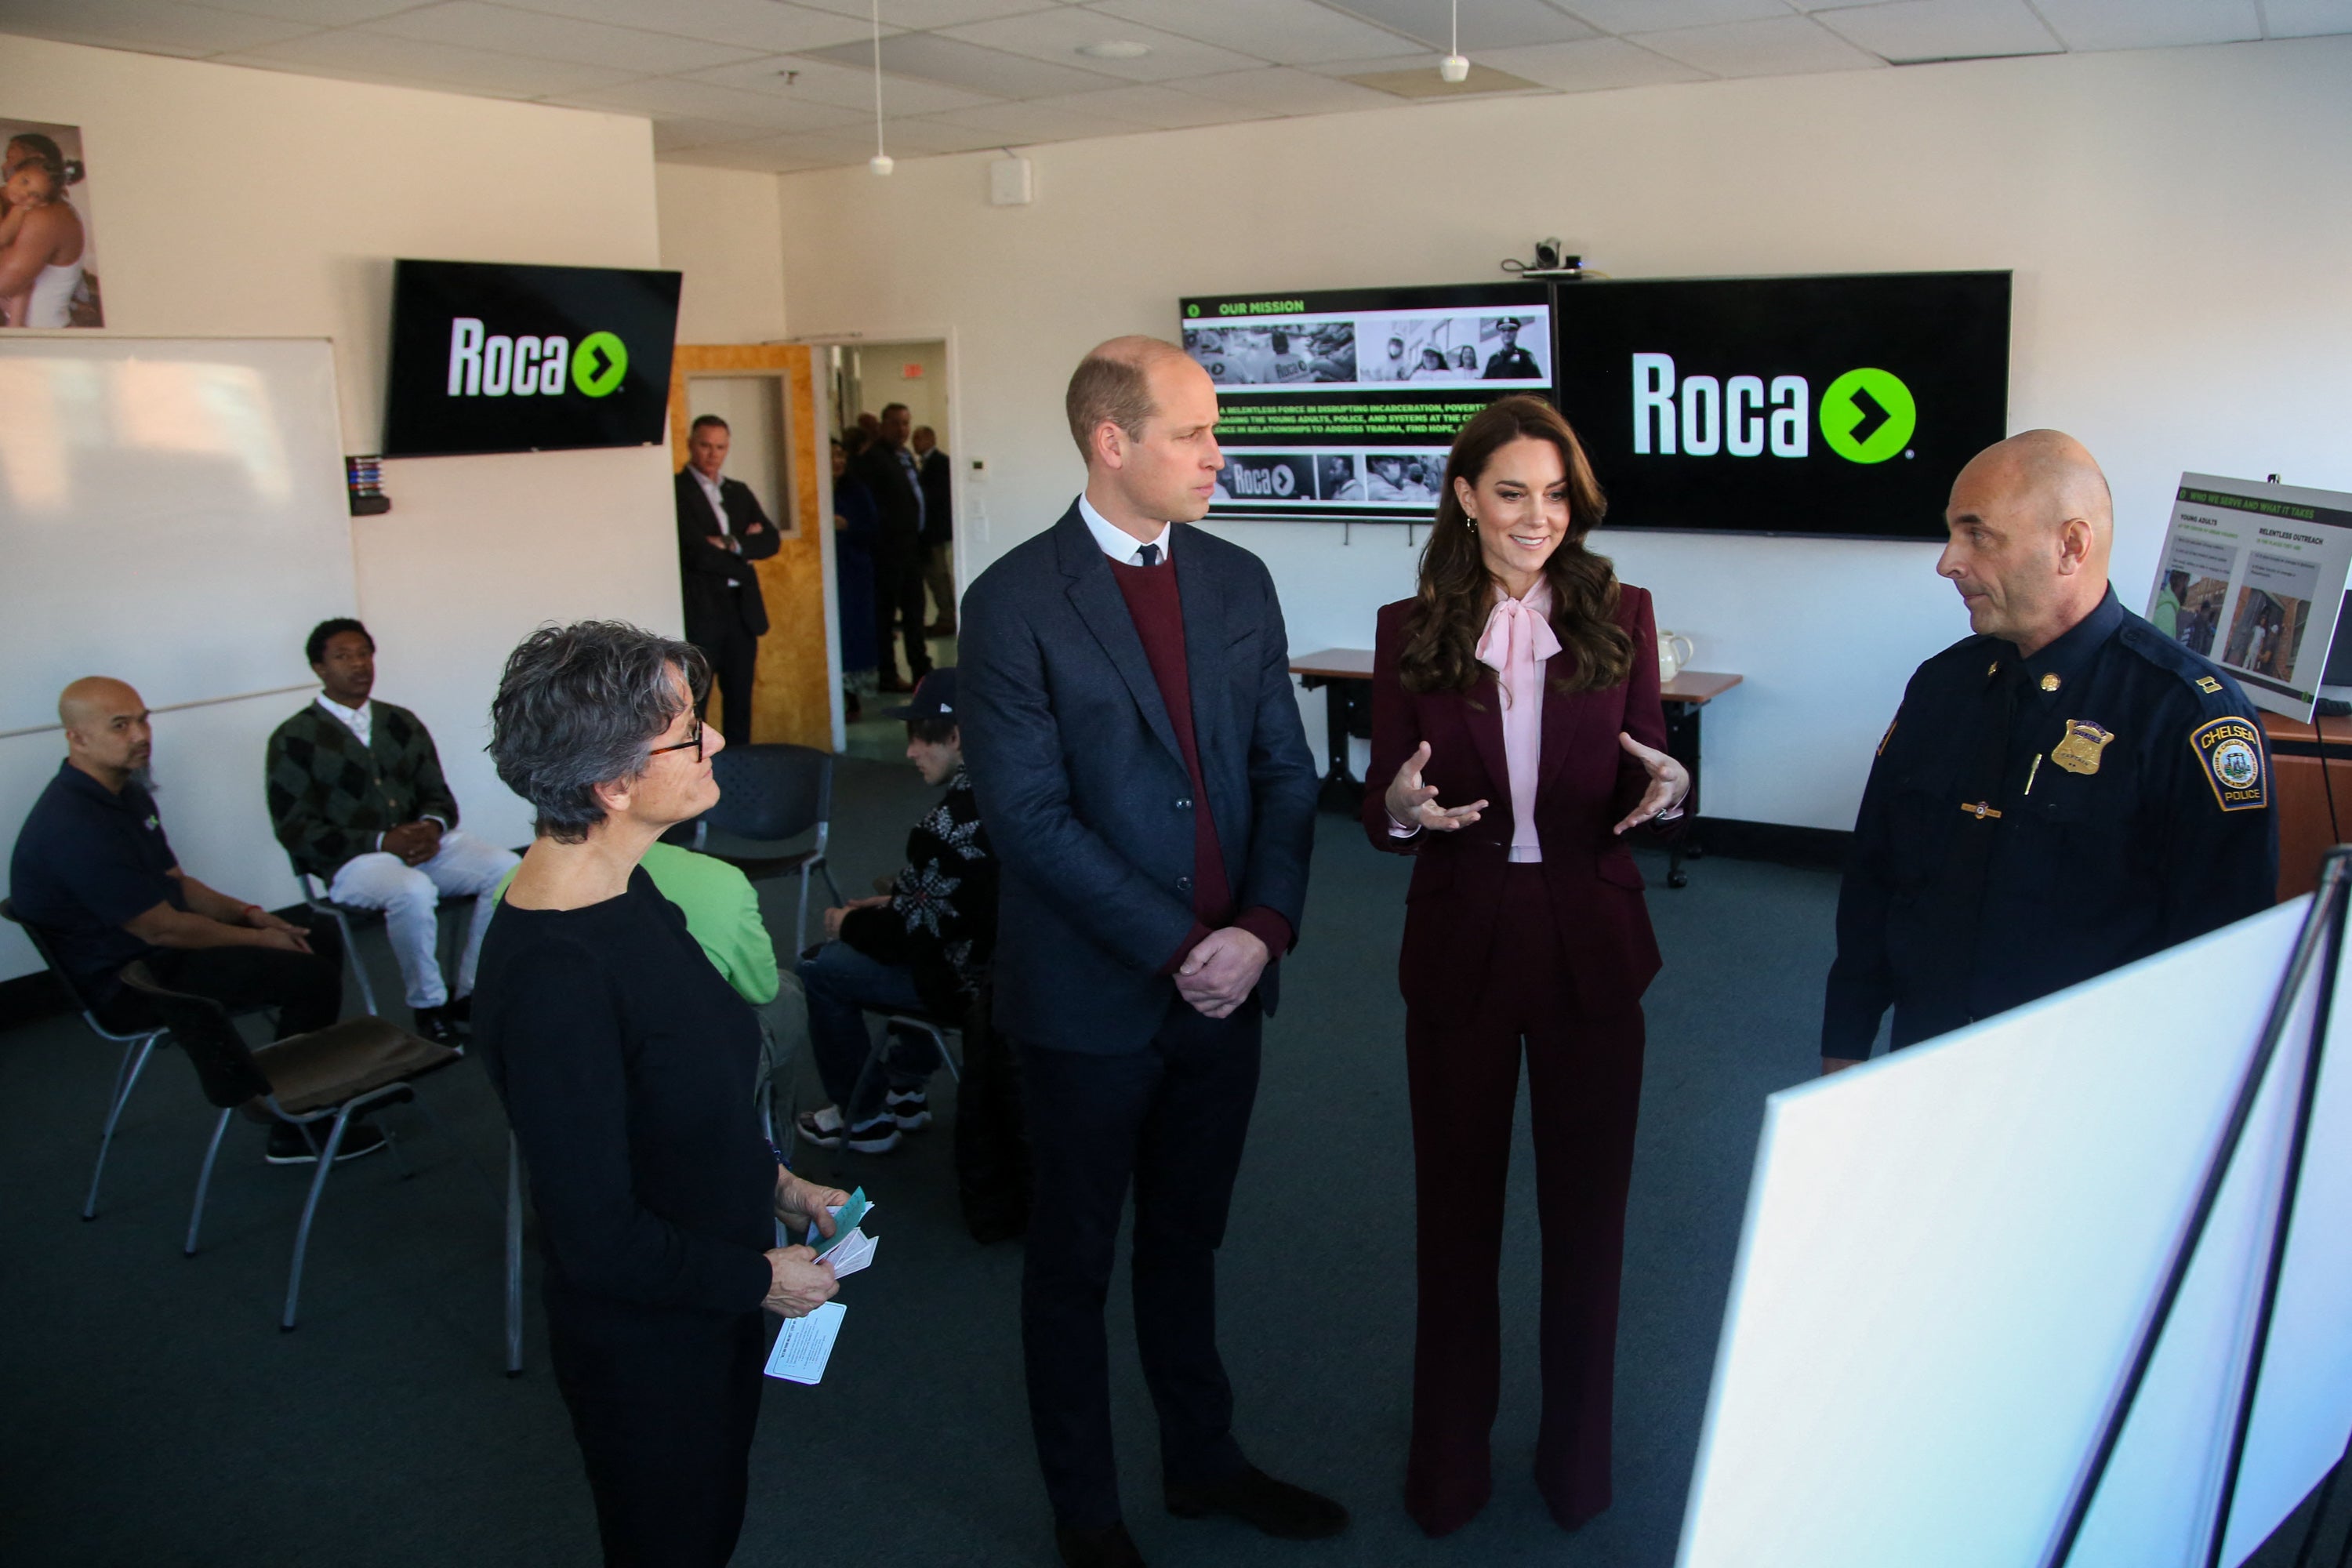 Prince William, Prince of Wales, and Catherine, Princess of Wales, meet with Molly Baldwin (L) founder of Roca and Chelsea Police Captain Dave Batchelor (R)